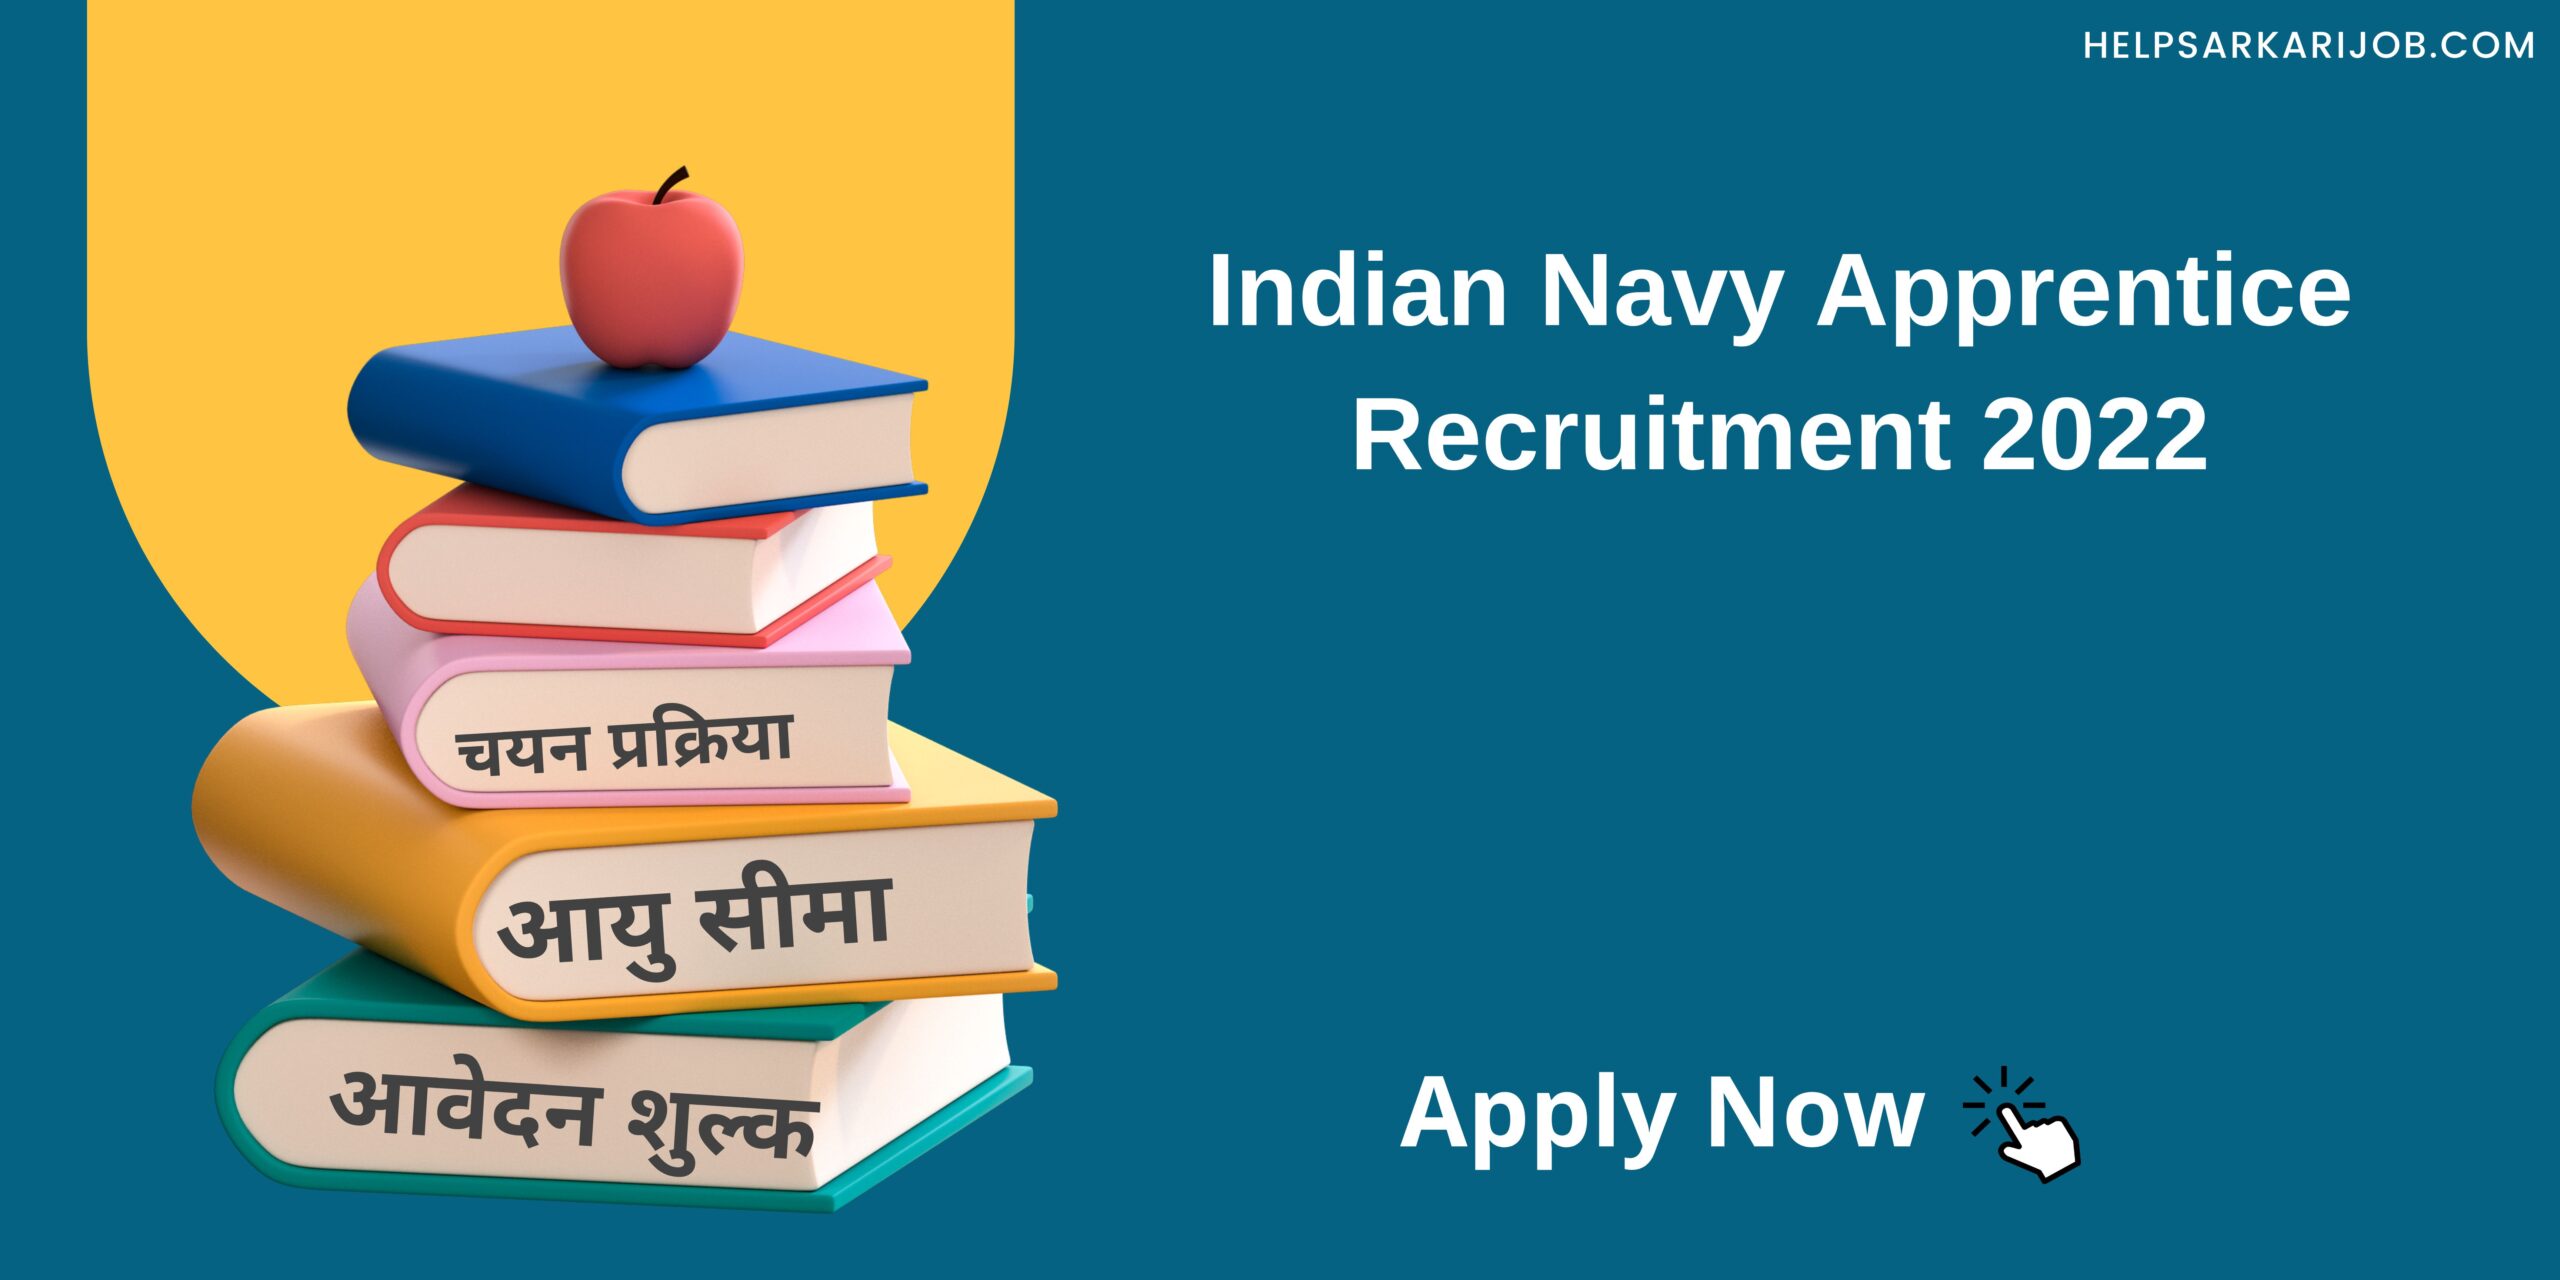 Indian Navy Apprentice Recruitment 2022 scaled -